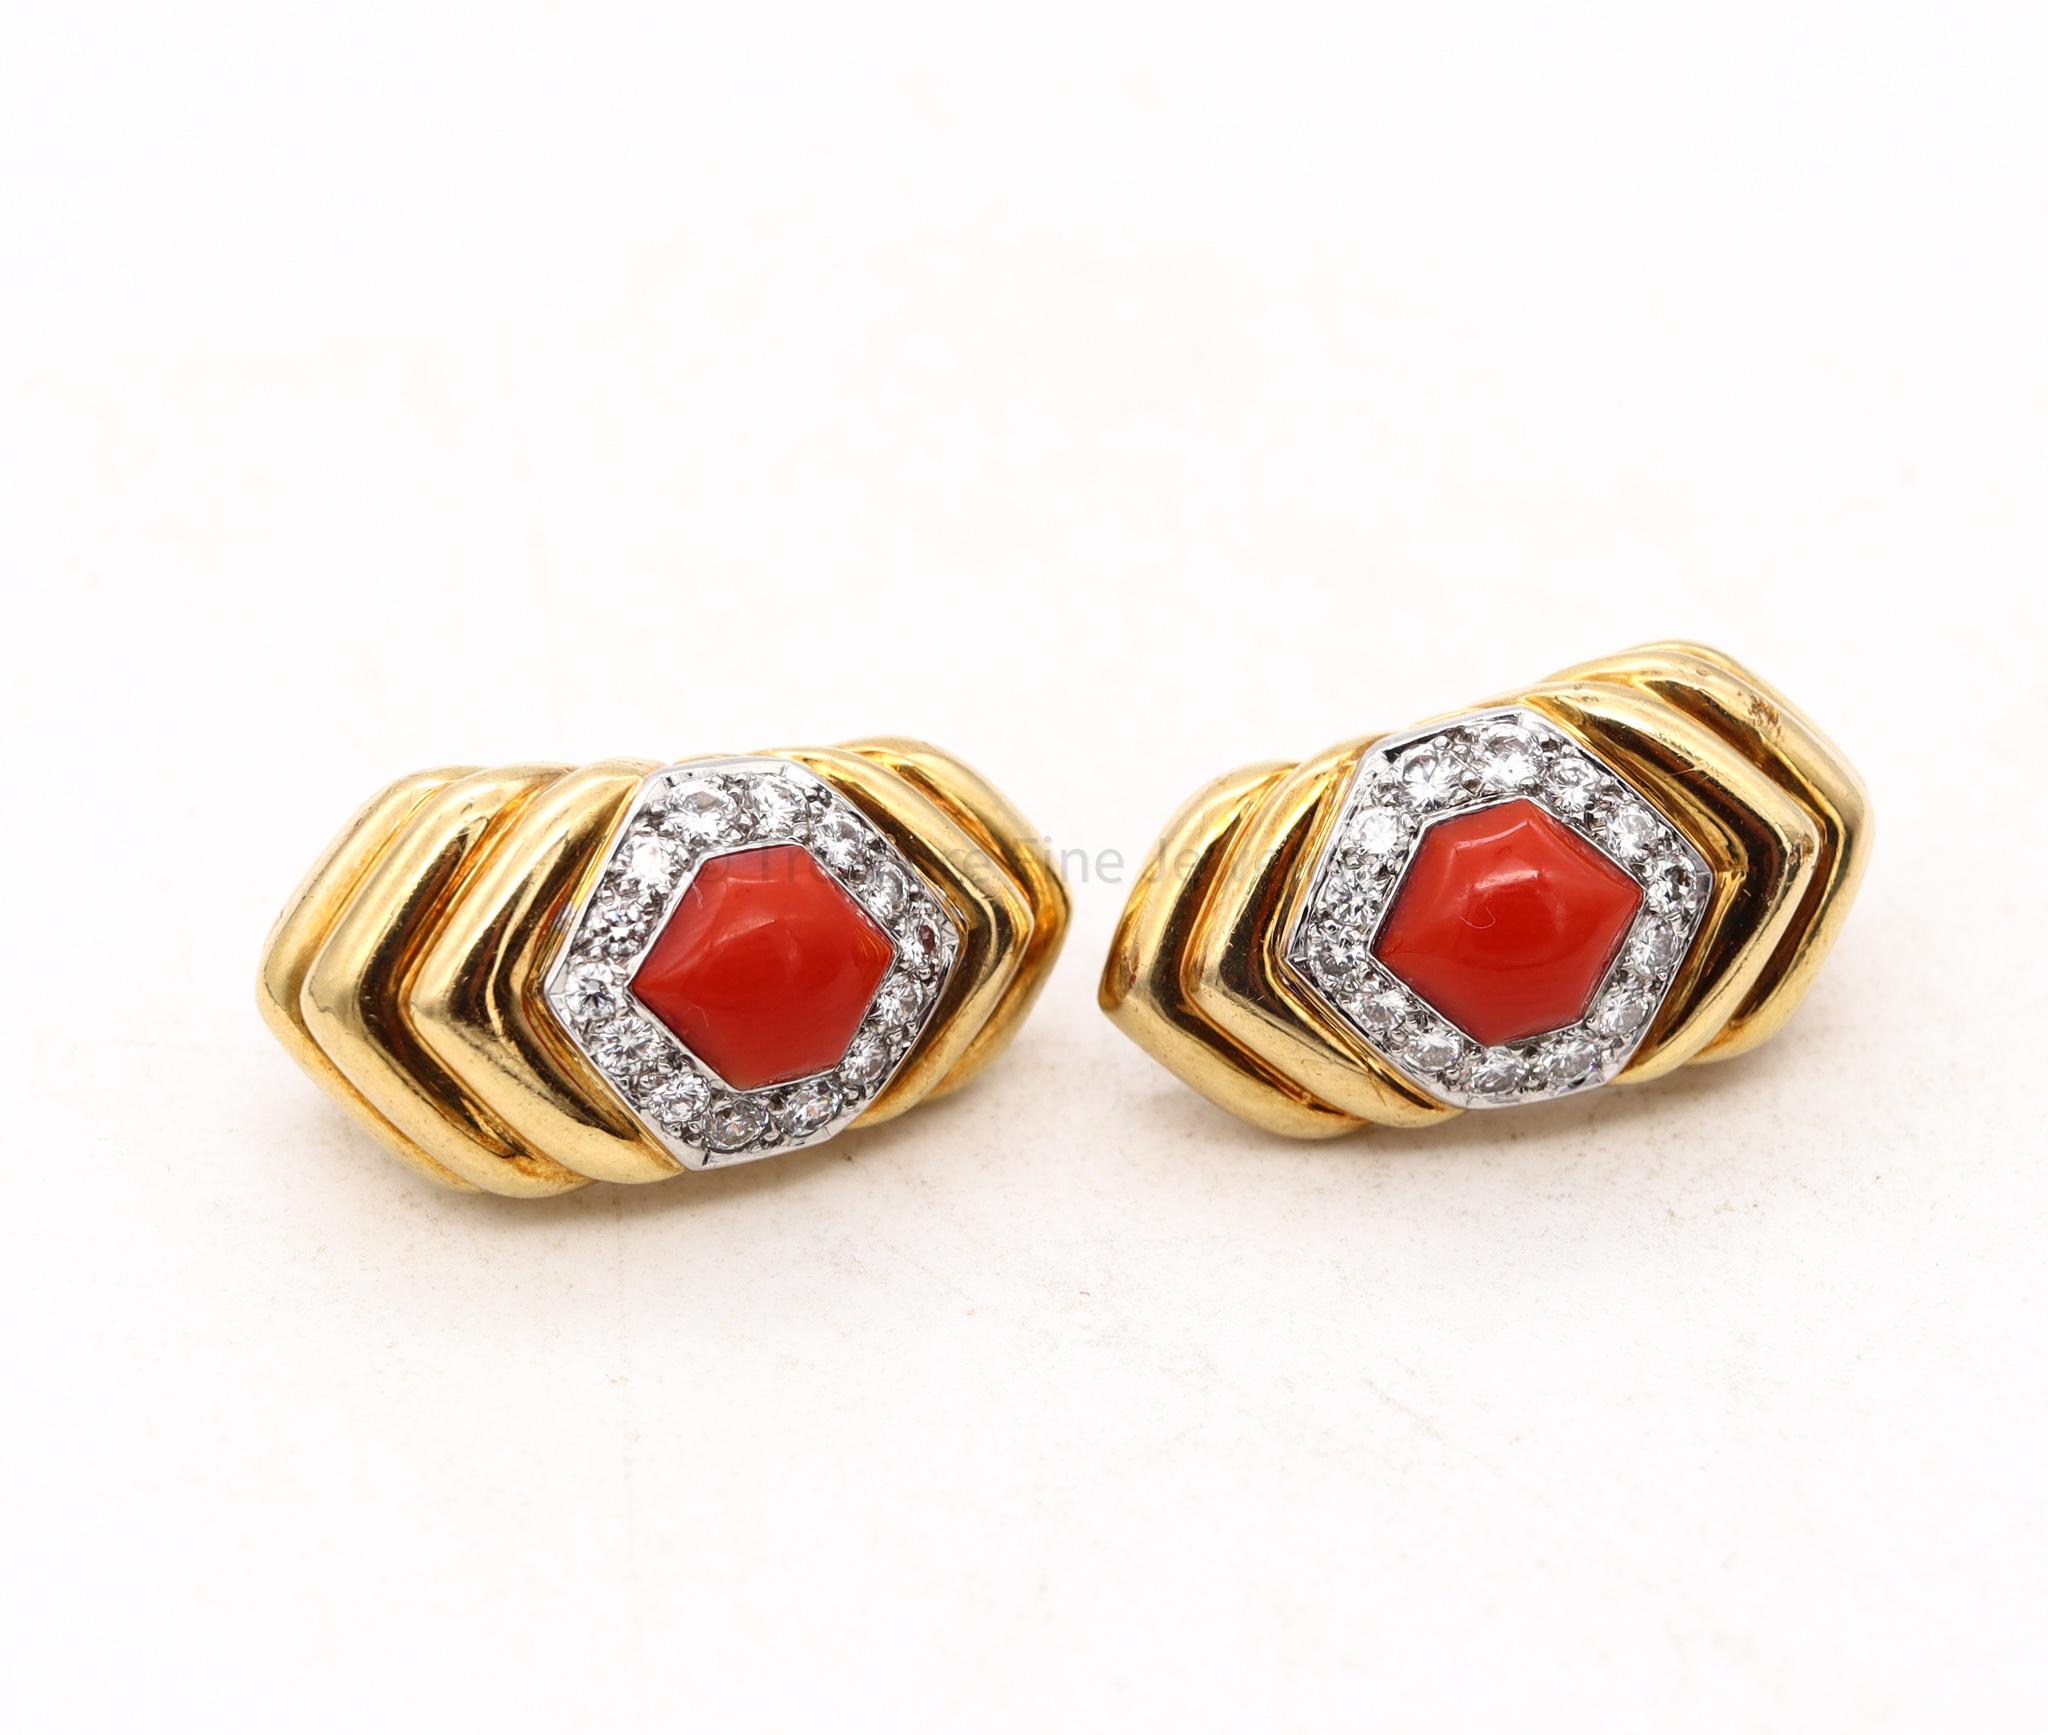 Mixed Cut Charles Turi New York Clip on Earrings 18kt Gold 5.96 Cts in Diamonds and Corals